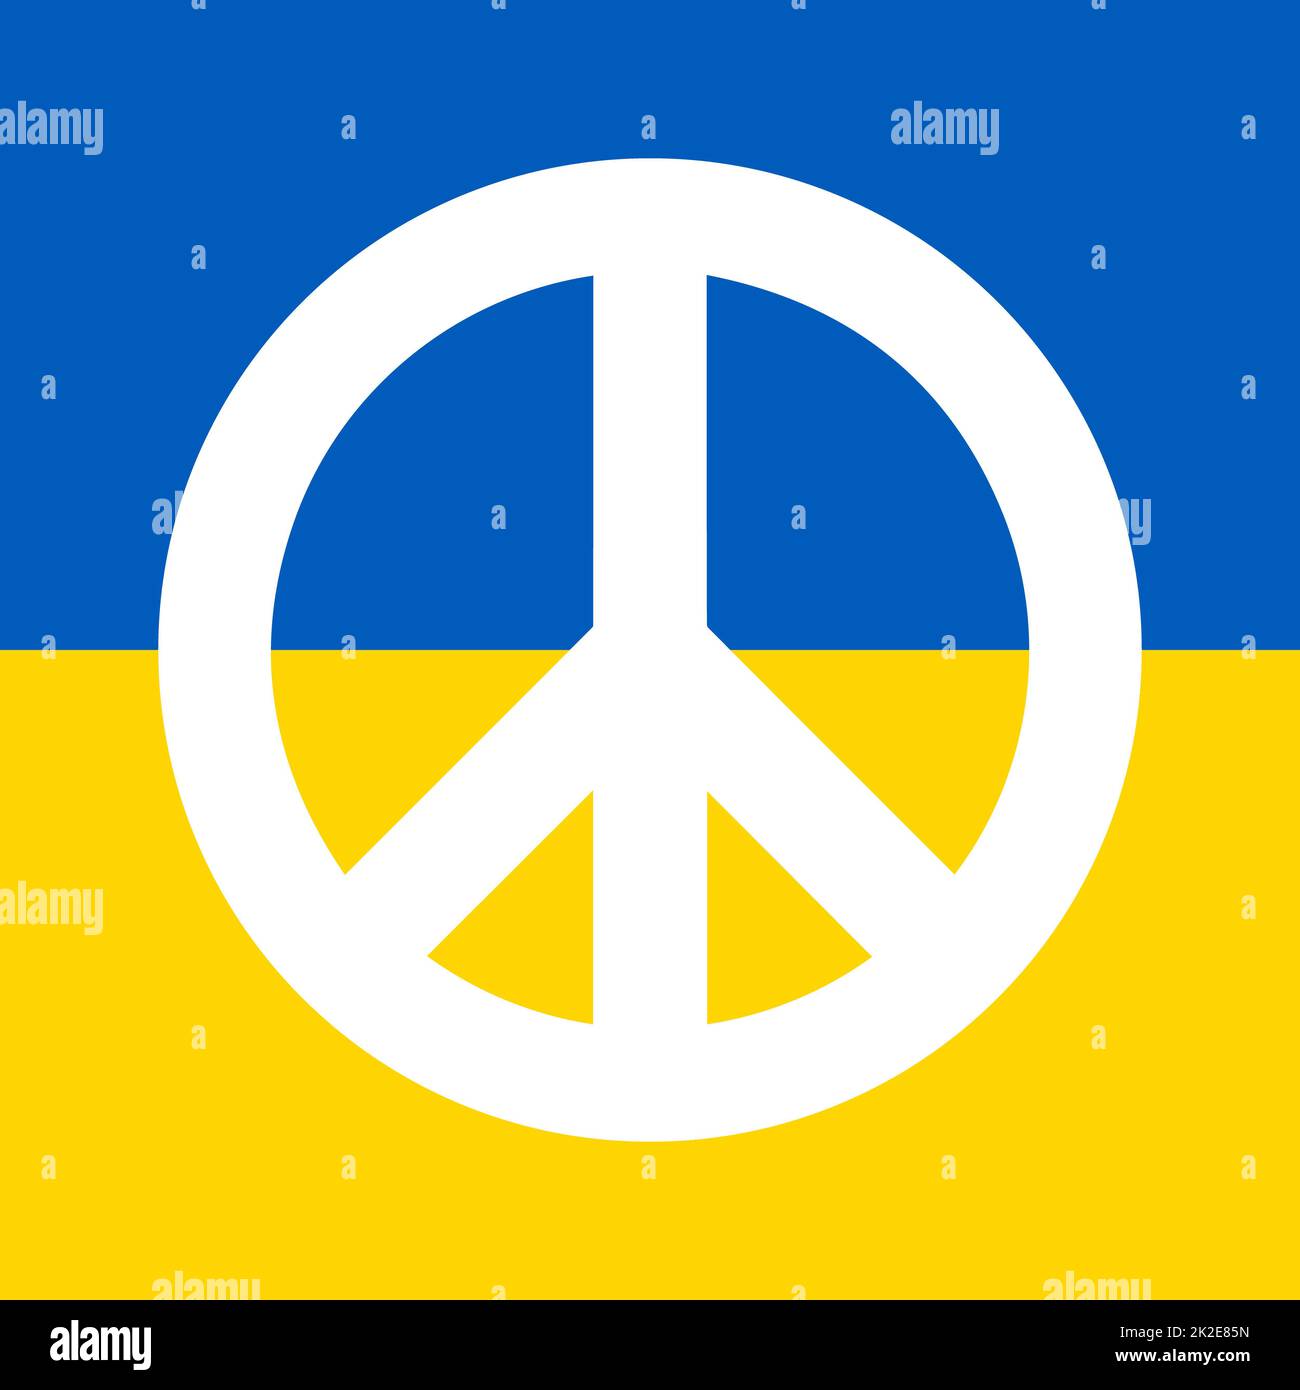 Ukrainian peace symbol - stay with Ukraine. Ukraine vector poster. Concept of Ukrainian and Russian military crisis, conflict between Ukraine and Russia. Support, pray and help Ukraine during the war. Stock Photo